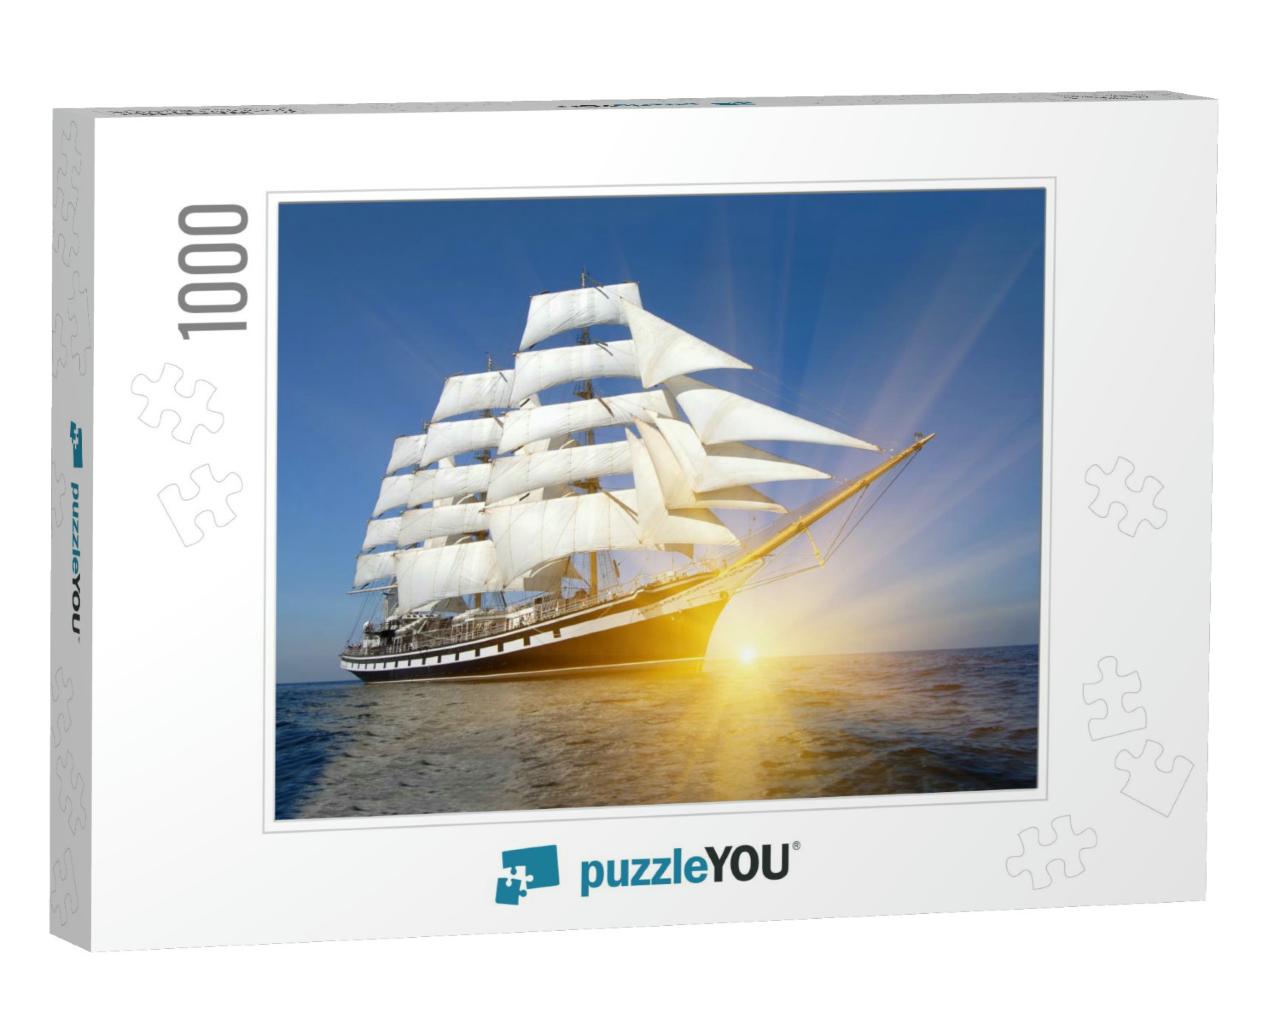 Sailing Ship & Sun Rays. Sailing. Yachting... Jigsaw Puzzle with 1000 pieces